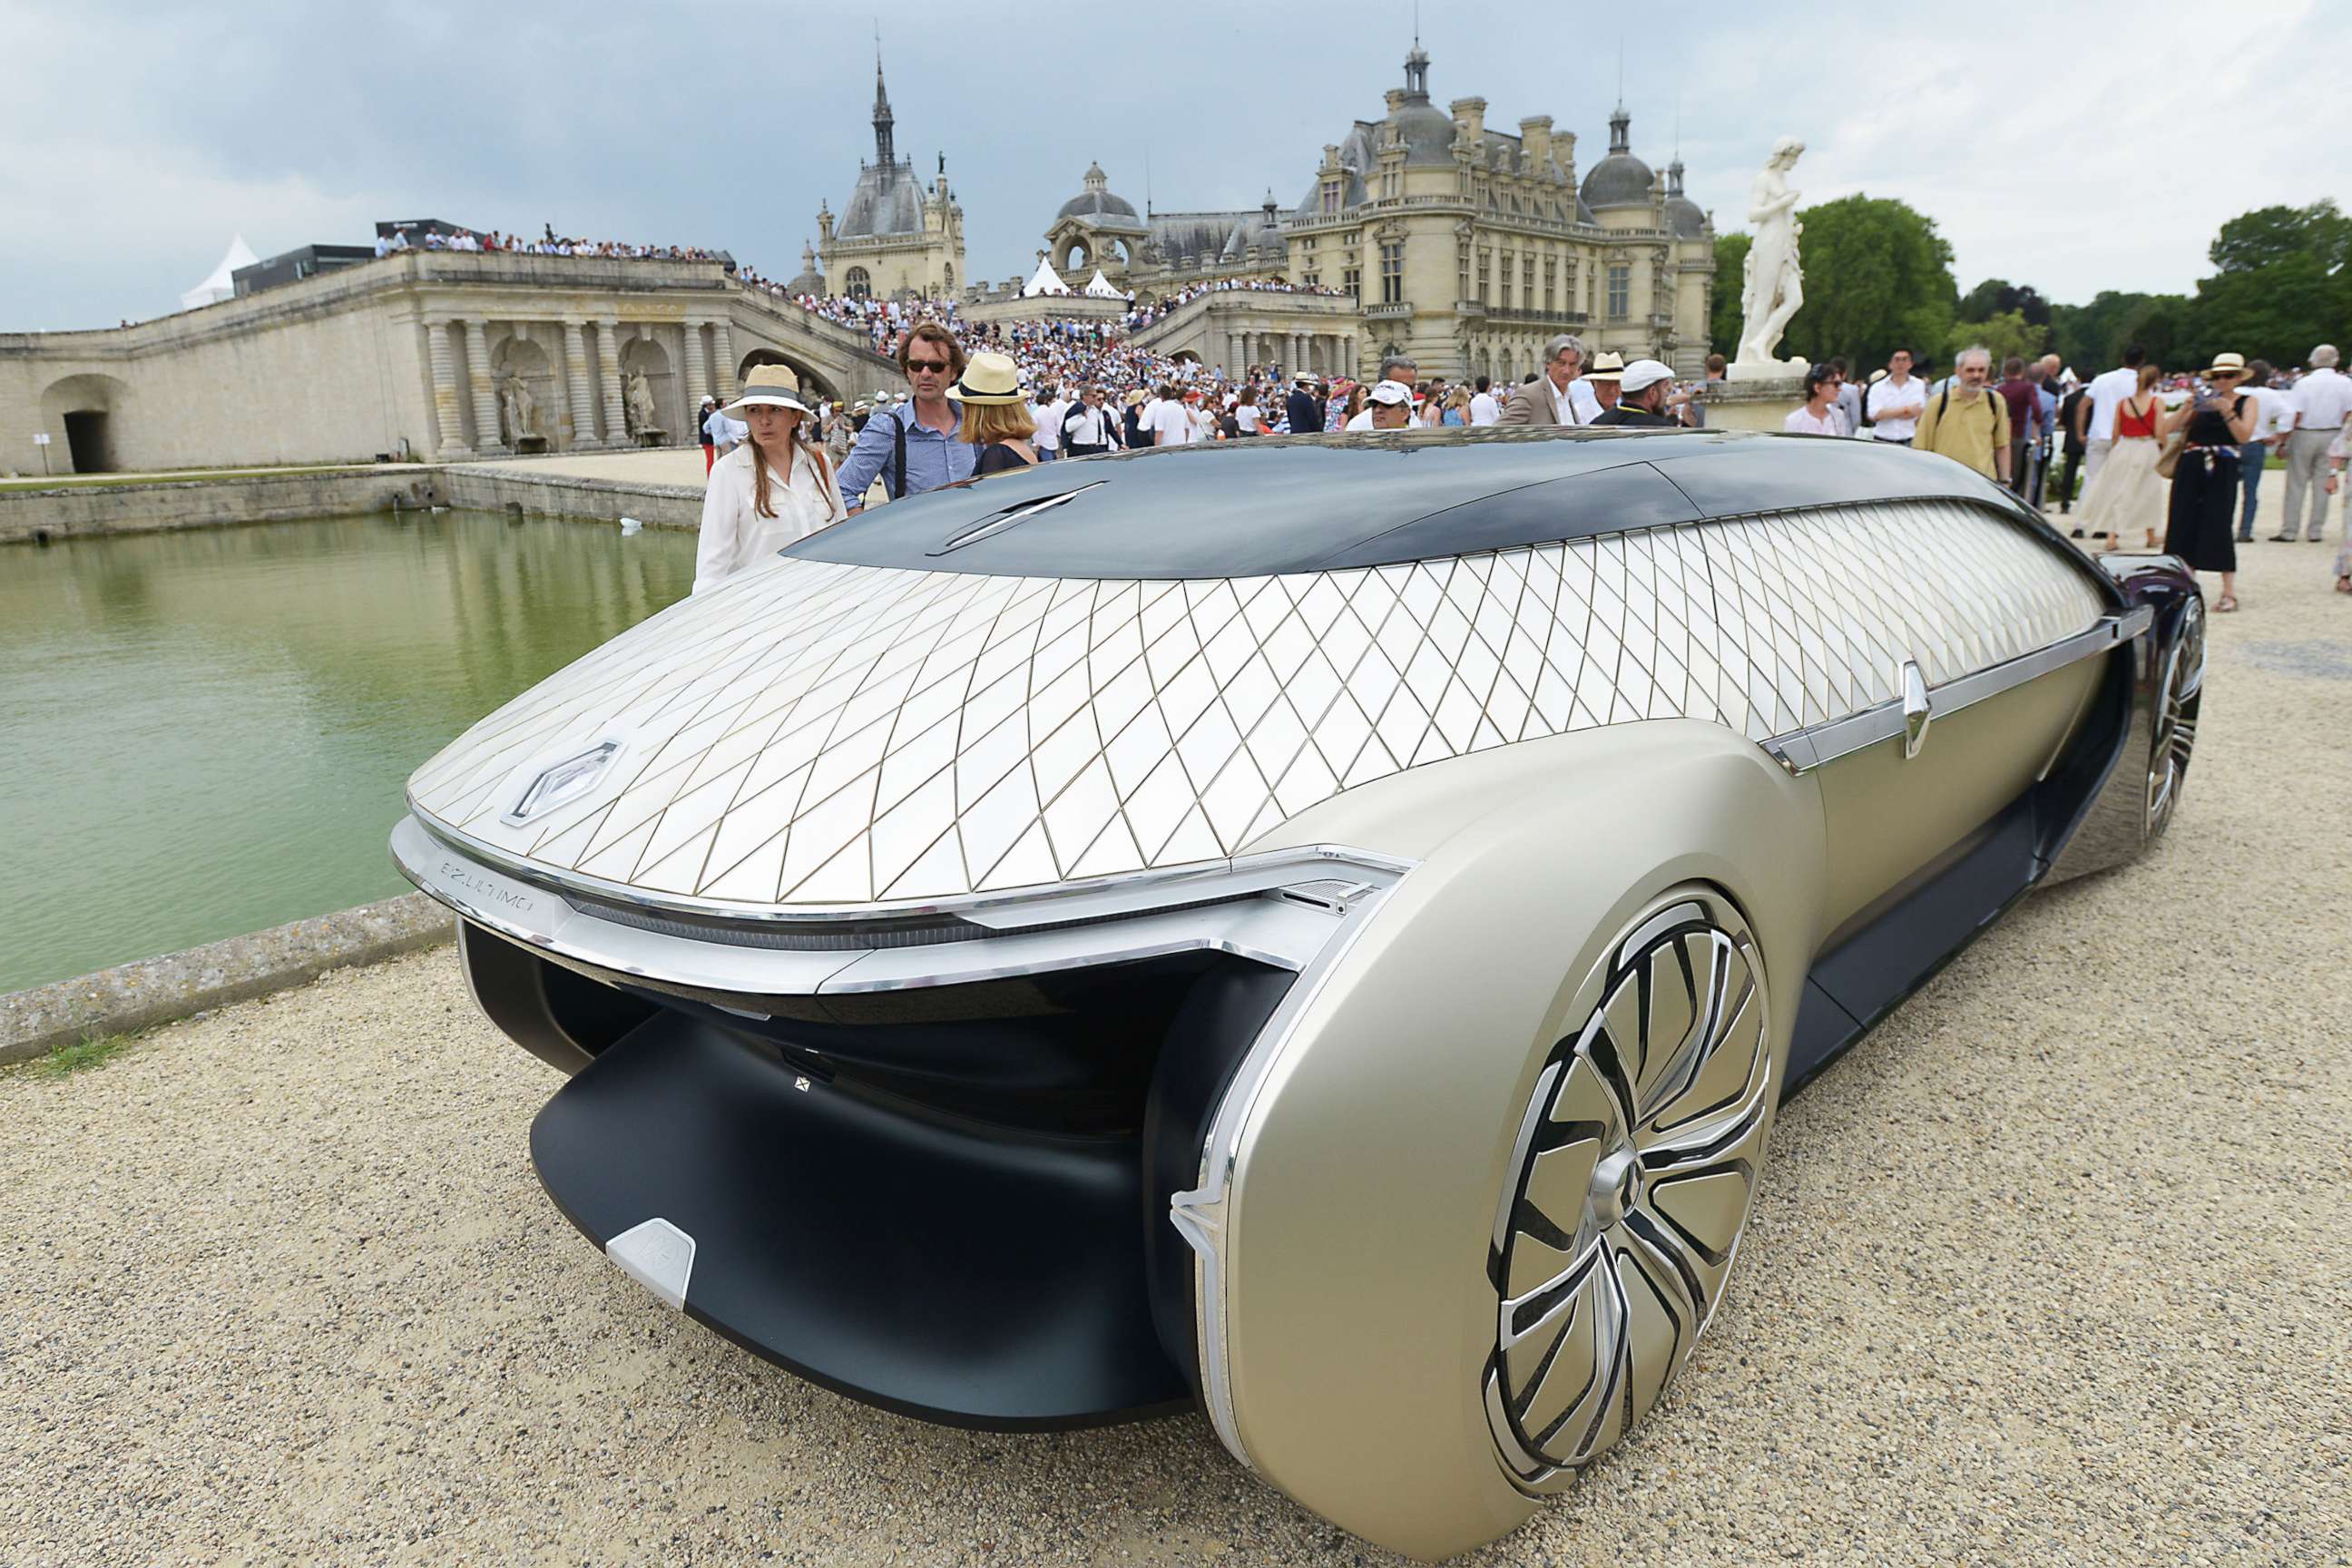 PHOTO: Renault's EZ Ultimo is an autonomous,100% electric robot concept car. It was part of the elegance competition at the Chantilly Arts and Elegance Richard Mille in the courtyard of Chateau de Chantilly, on June 30, 2019 in Chantilly, France.